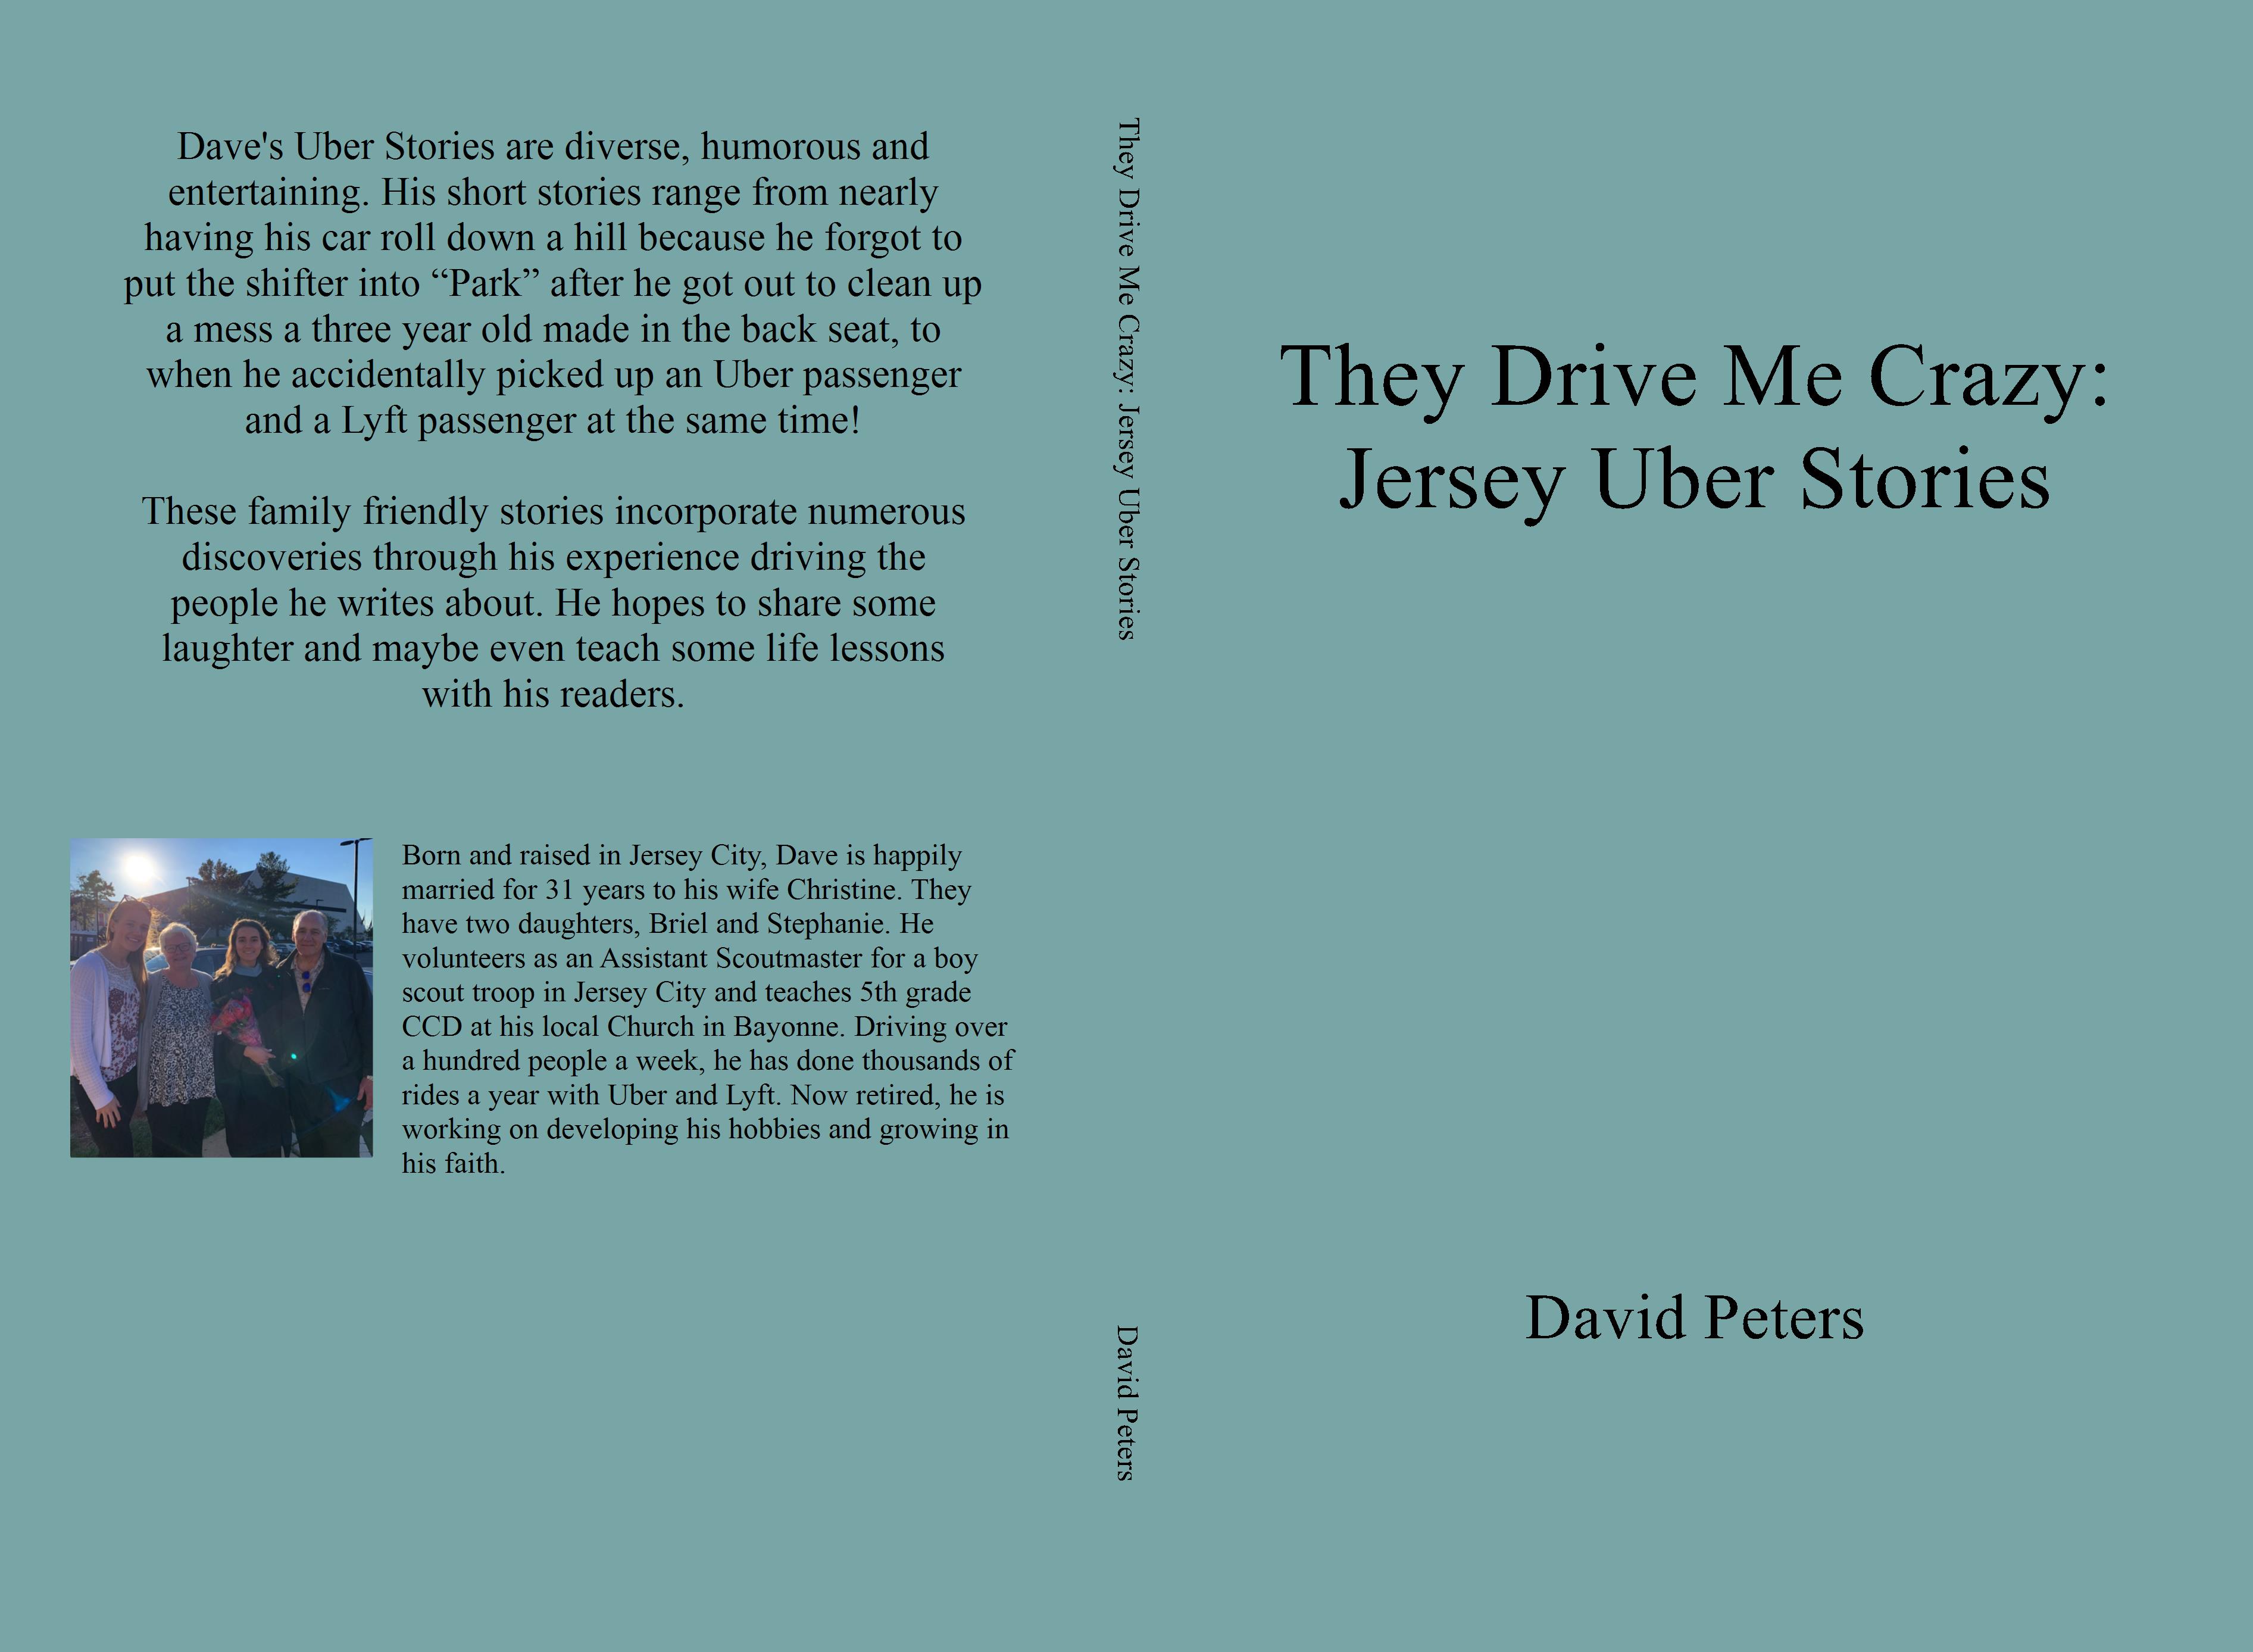 They Drive Me Crazy - Jersey Uber Stories cover image